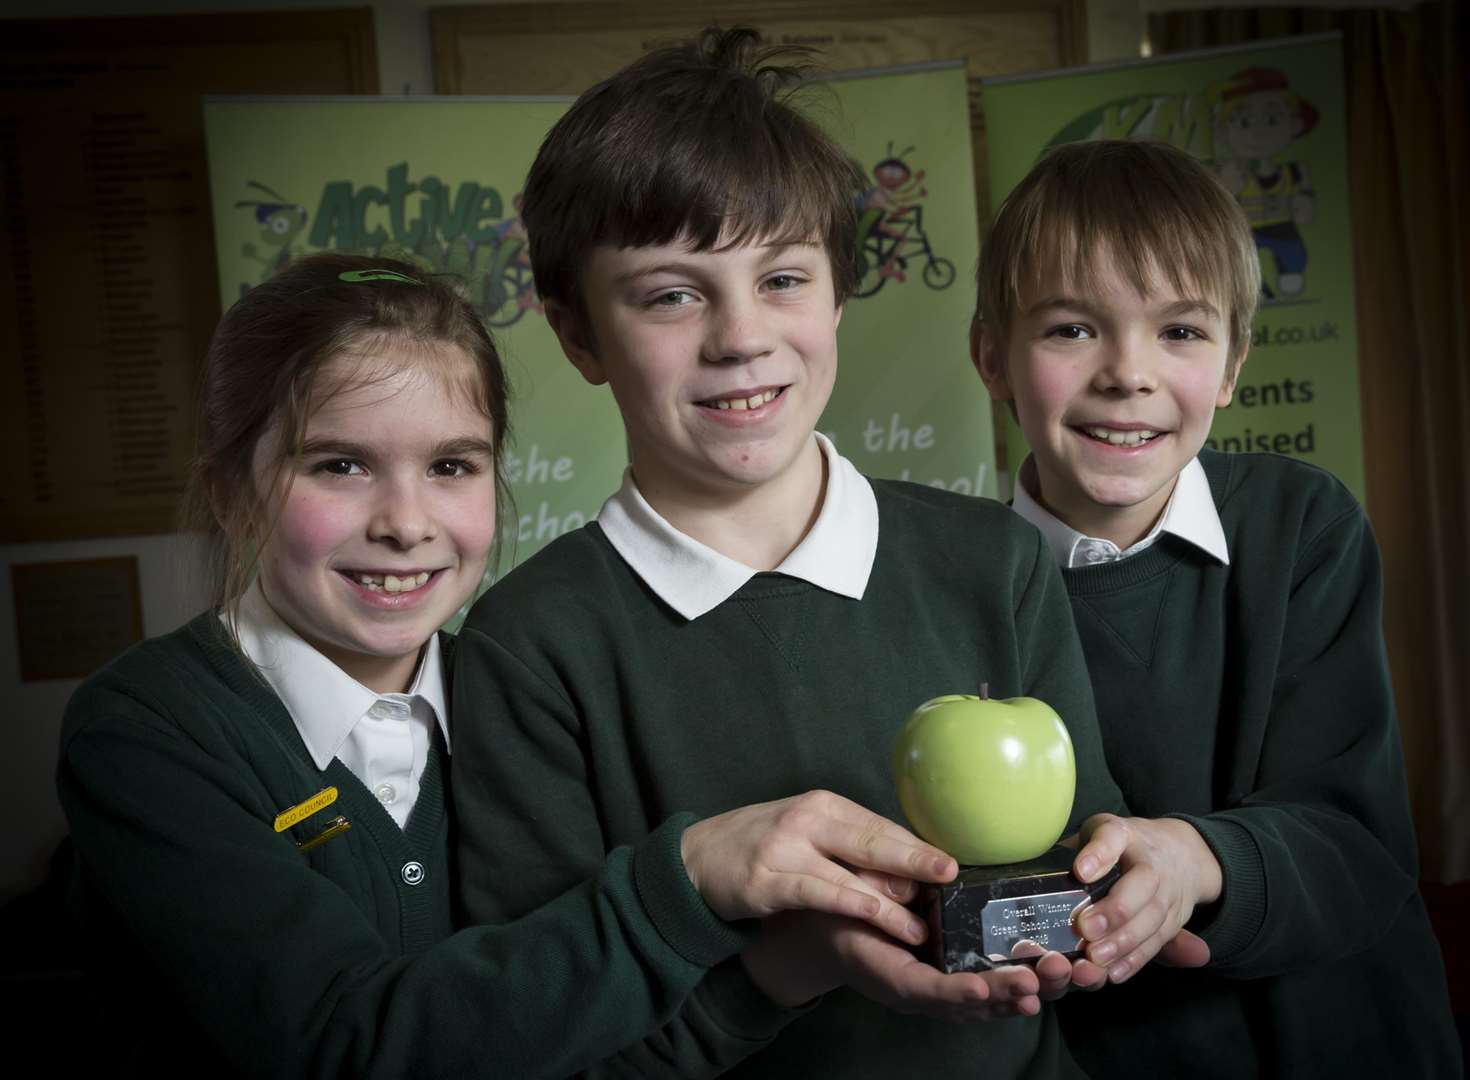 The Green School Awards celebrate eco aware pupils and schools and inspire others to follow their lead.